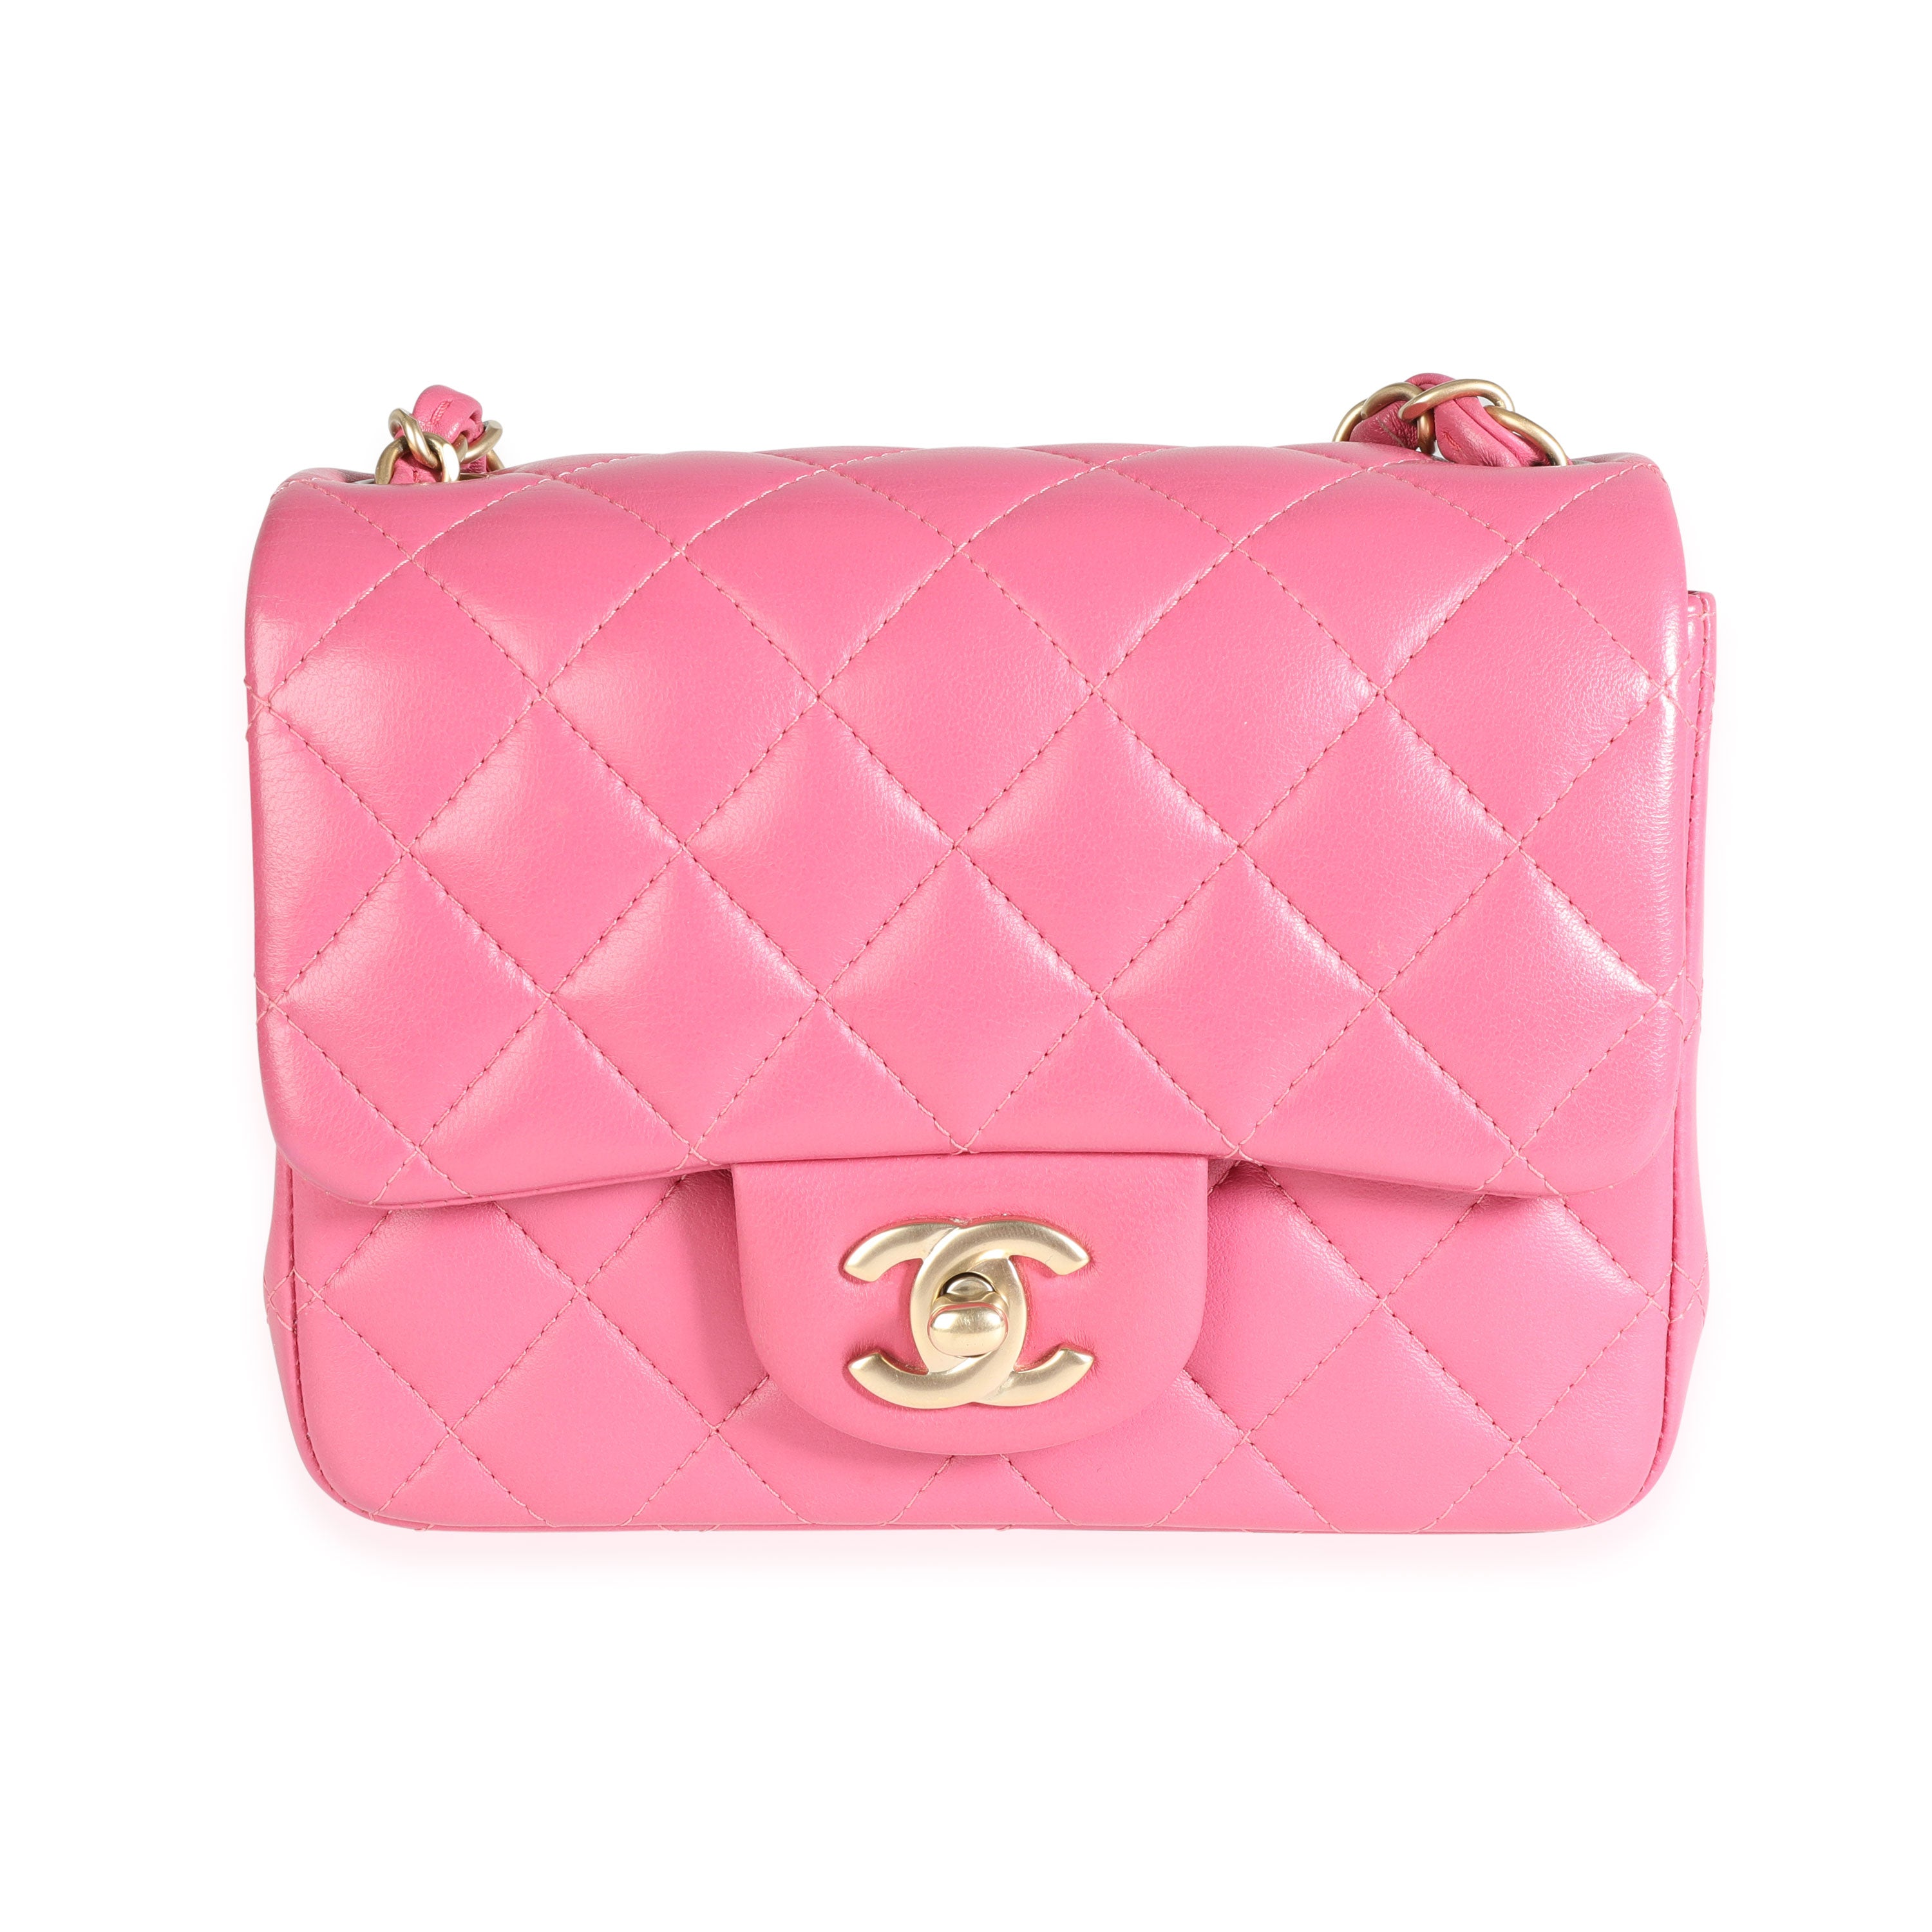 Chanel Pink Quilted Lambskin Square Mini Classic Flap Bag, myGemma